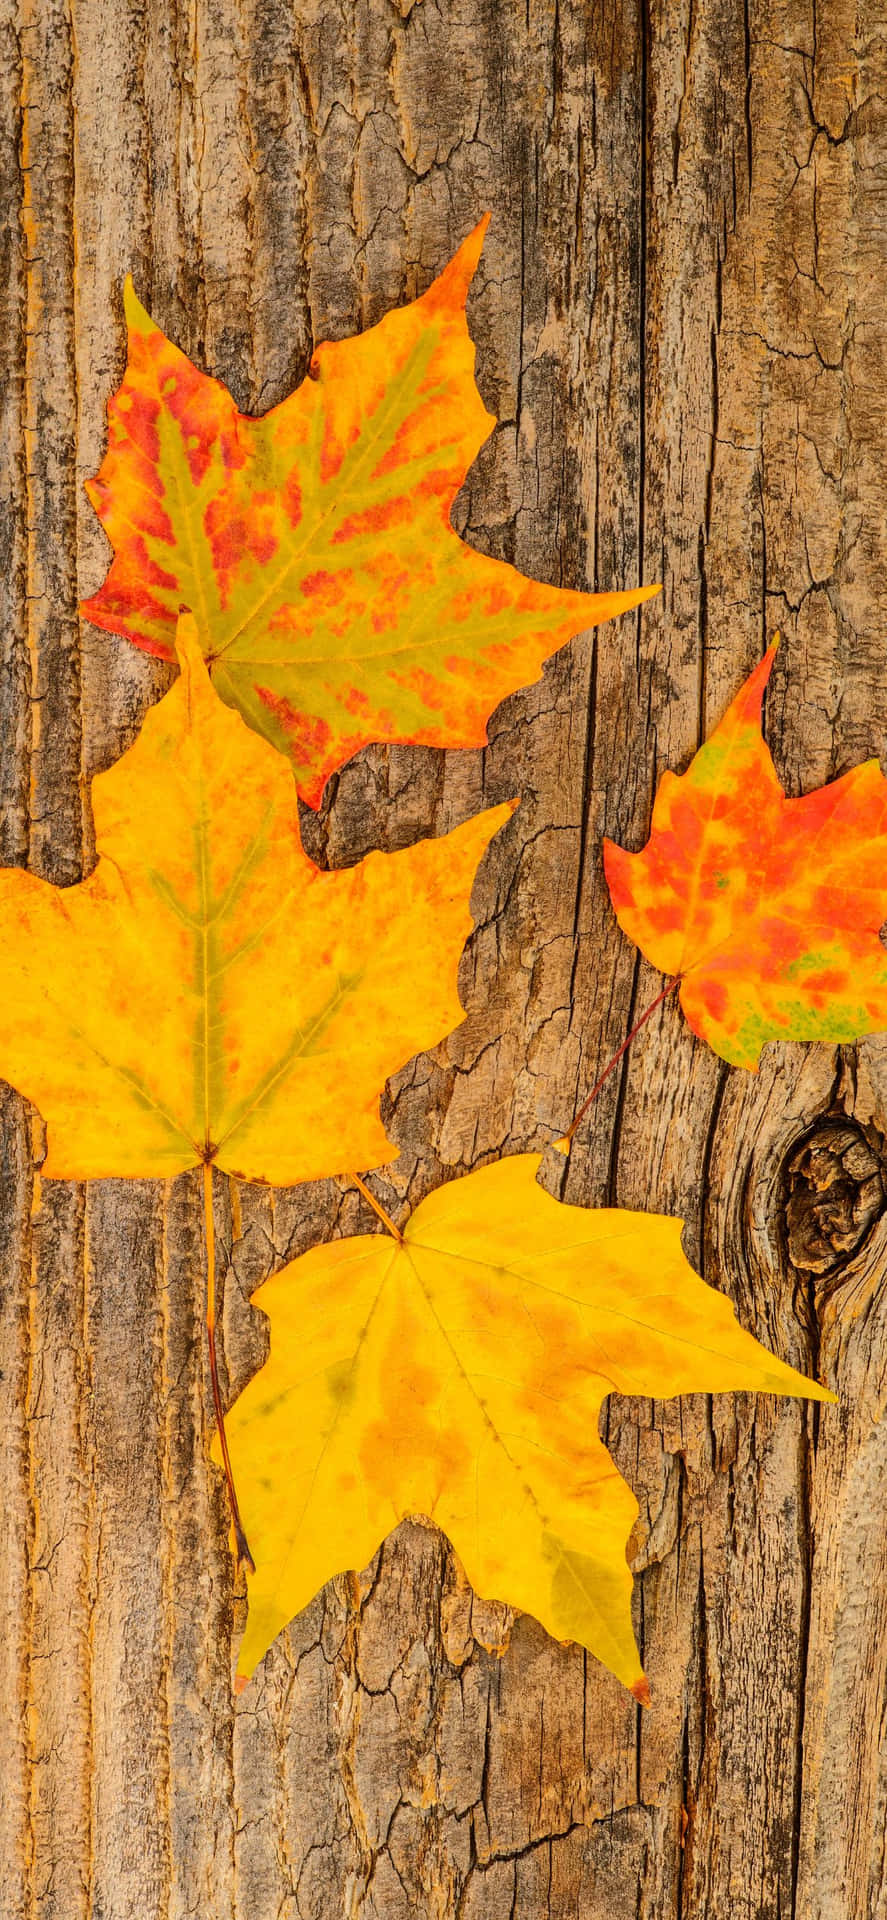 Capture the beauty of the season with this gorgeous Fall landscape.